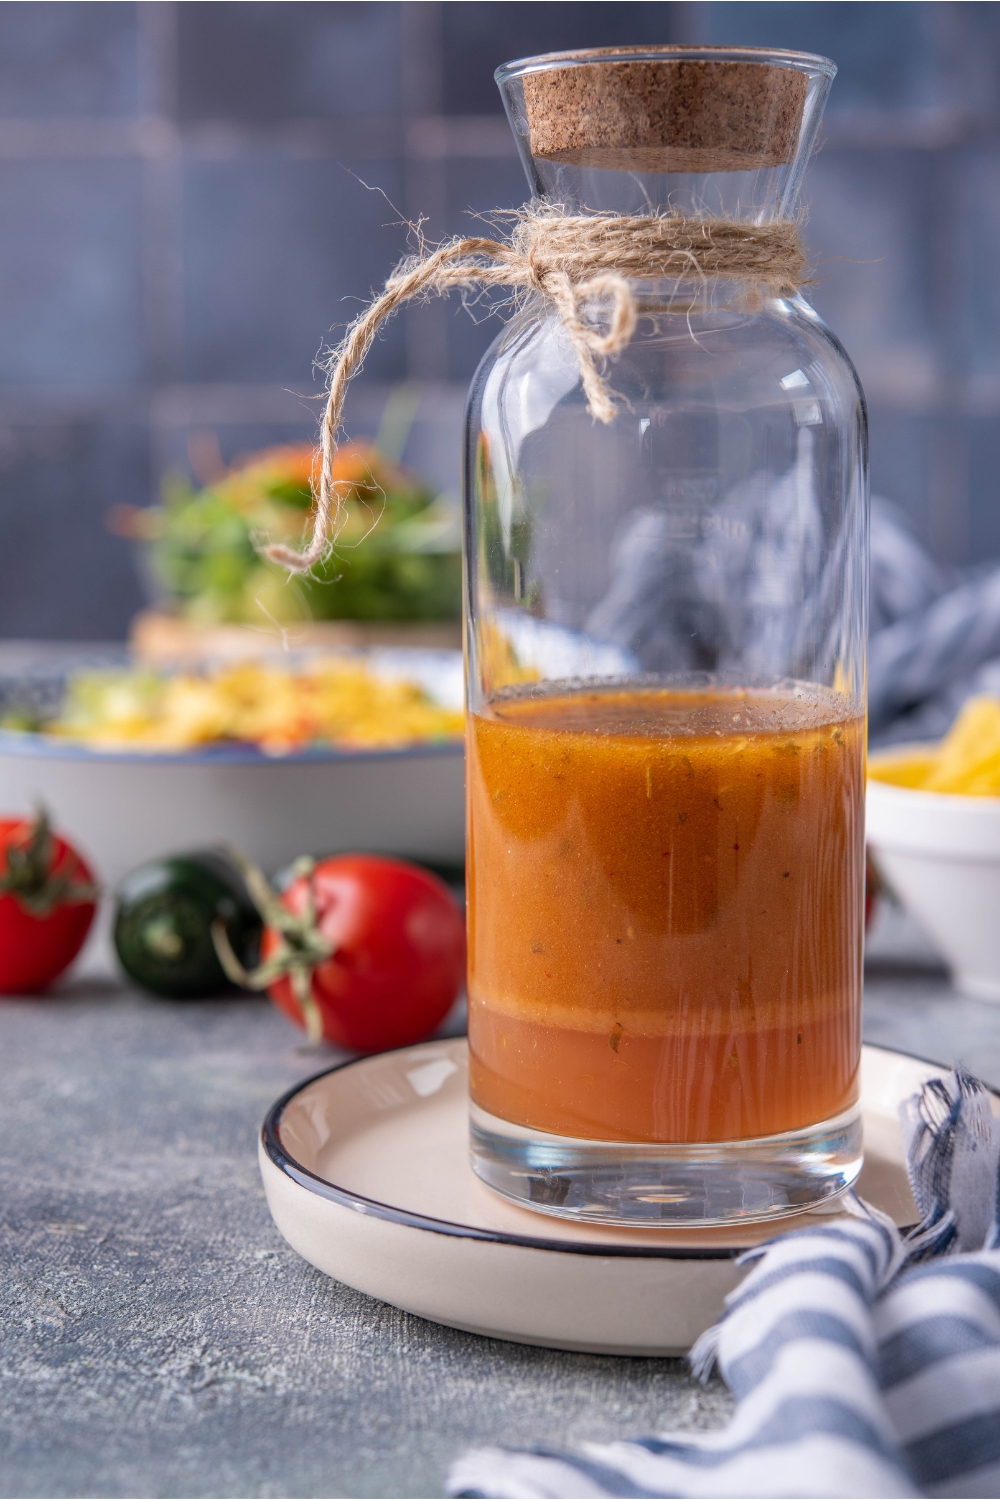 Chipotle honey vinaigrette in a clear dressing bottle with a wood lid and twine tied around the bottle. The bottle is on a white plate and in the background are tomatoes and an assortment of ingredients.